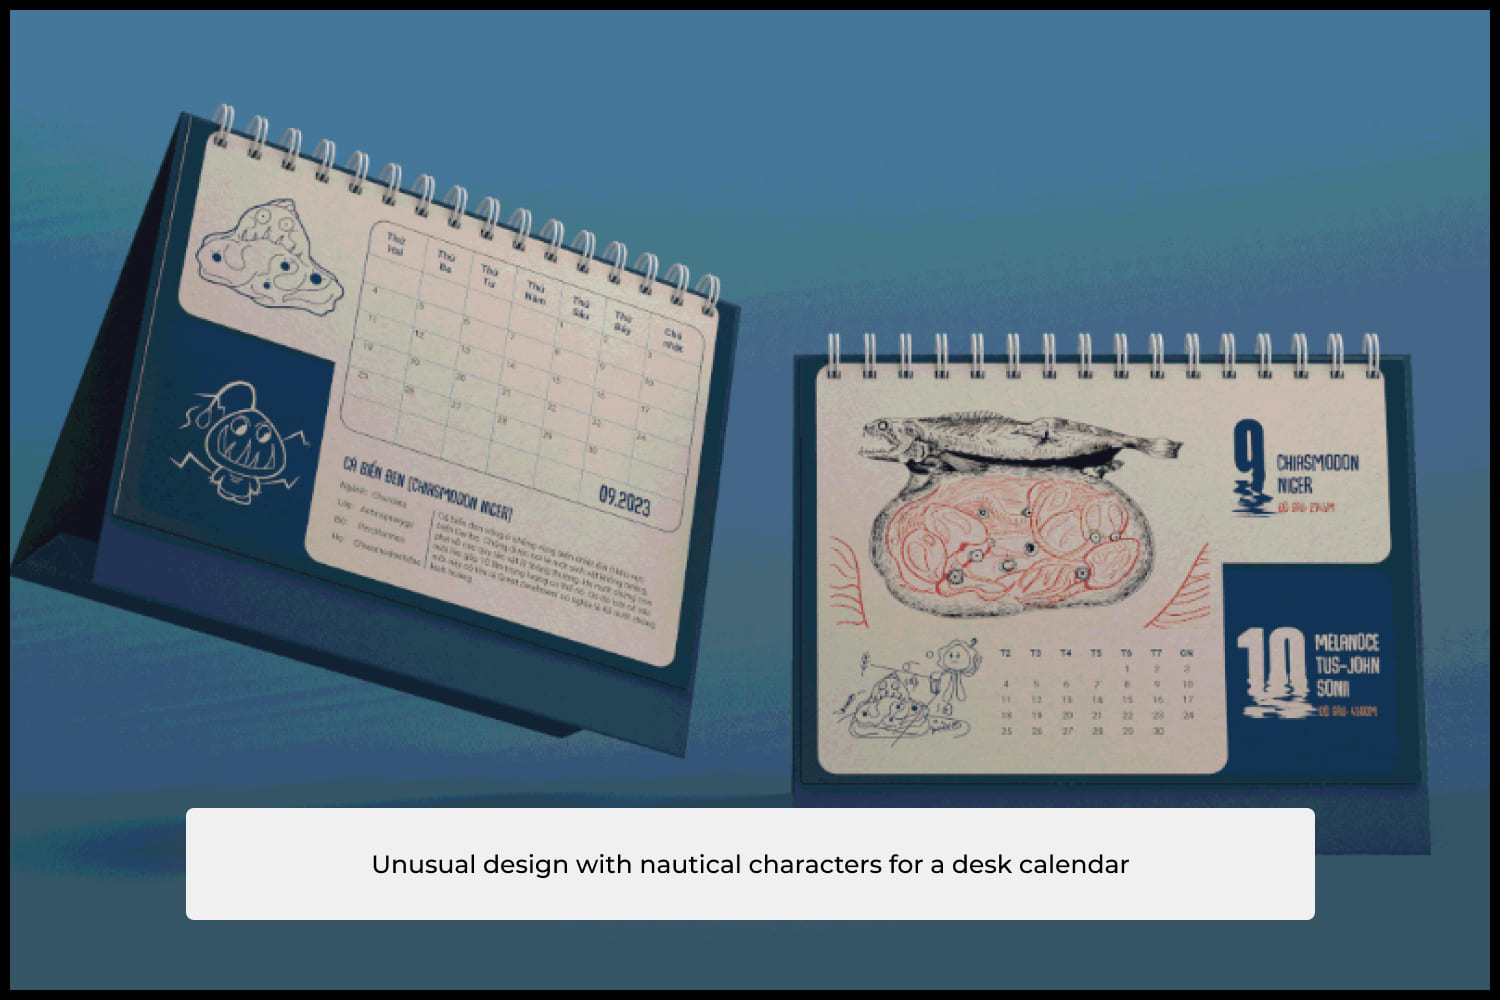 Unusual design with nautical characters for a desk calendar.